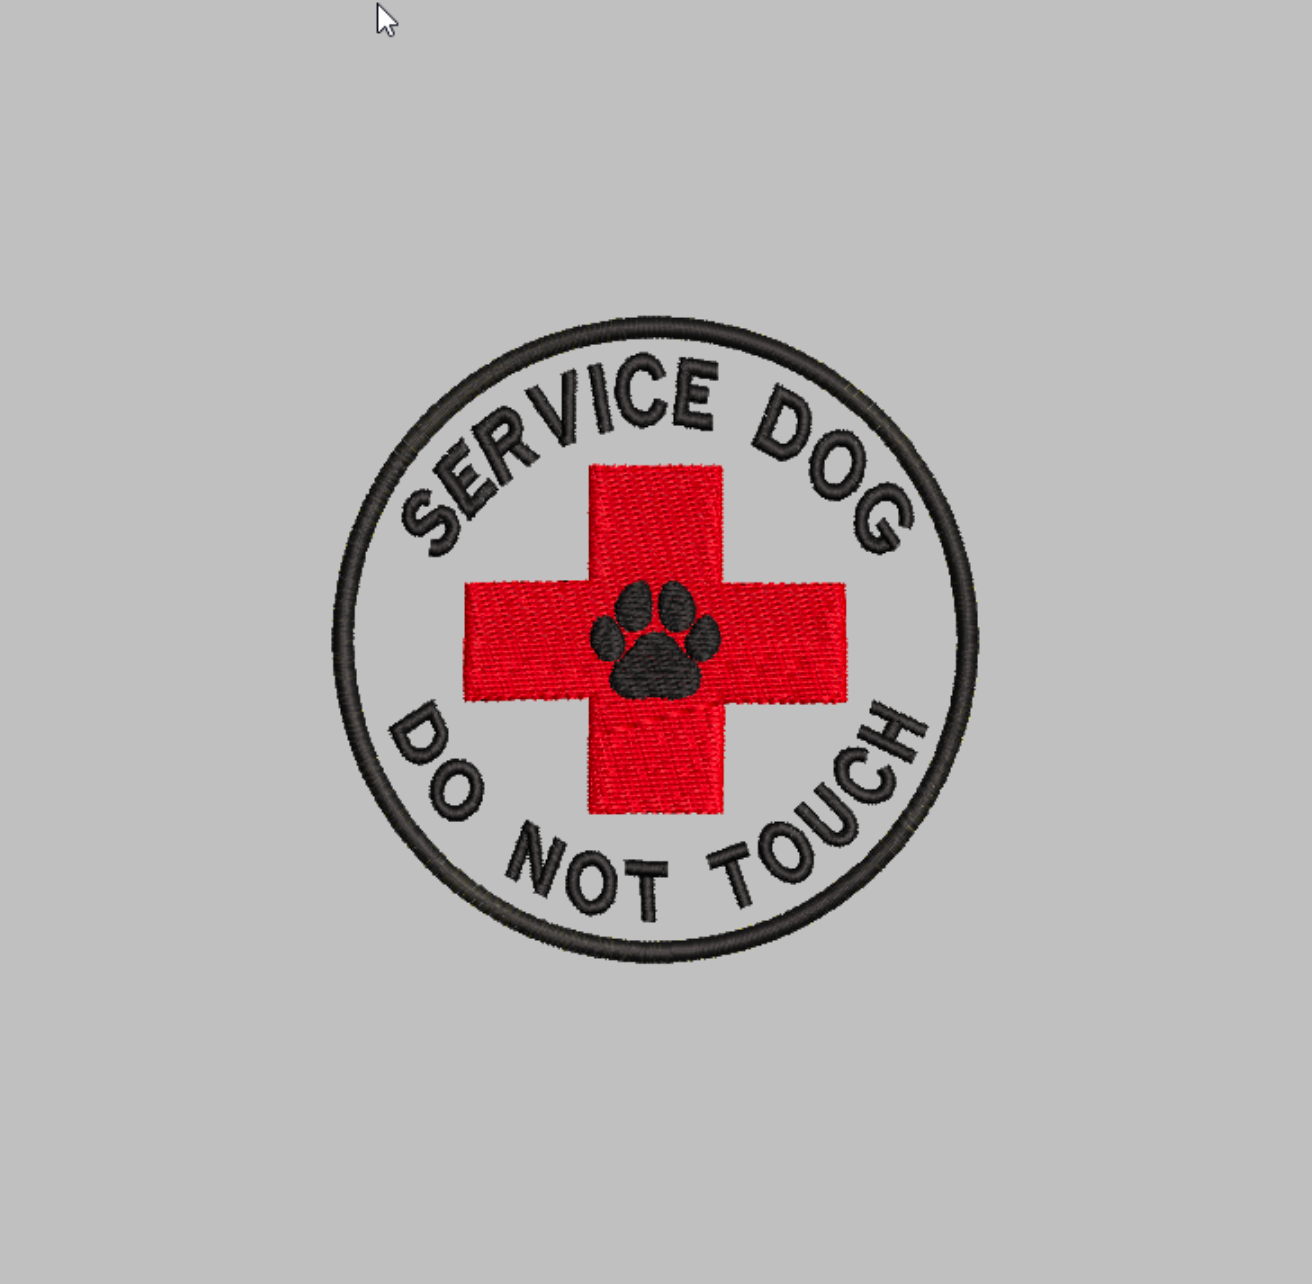 Service Dog Do Not Touch Embroidery File